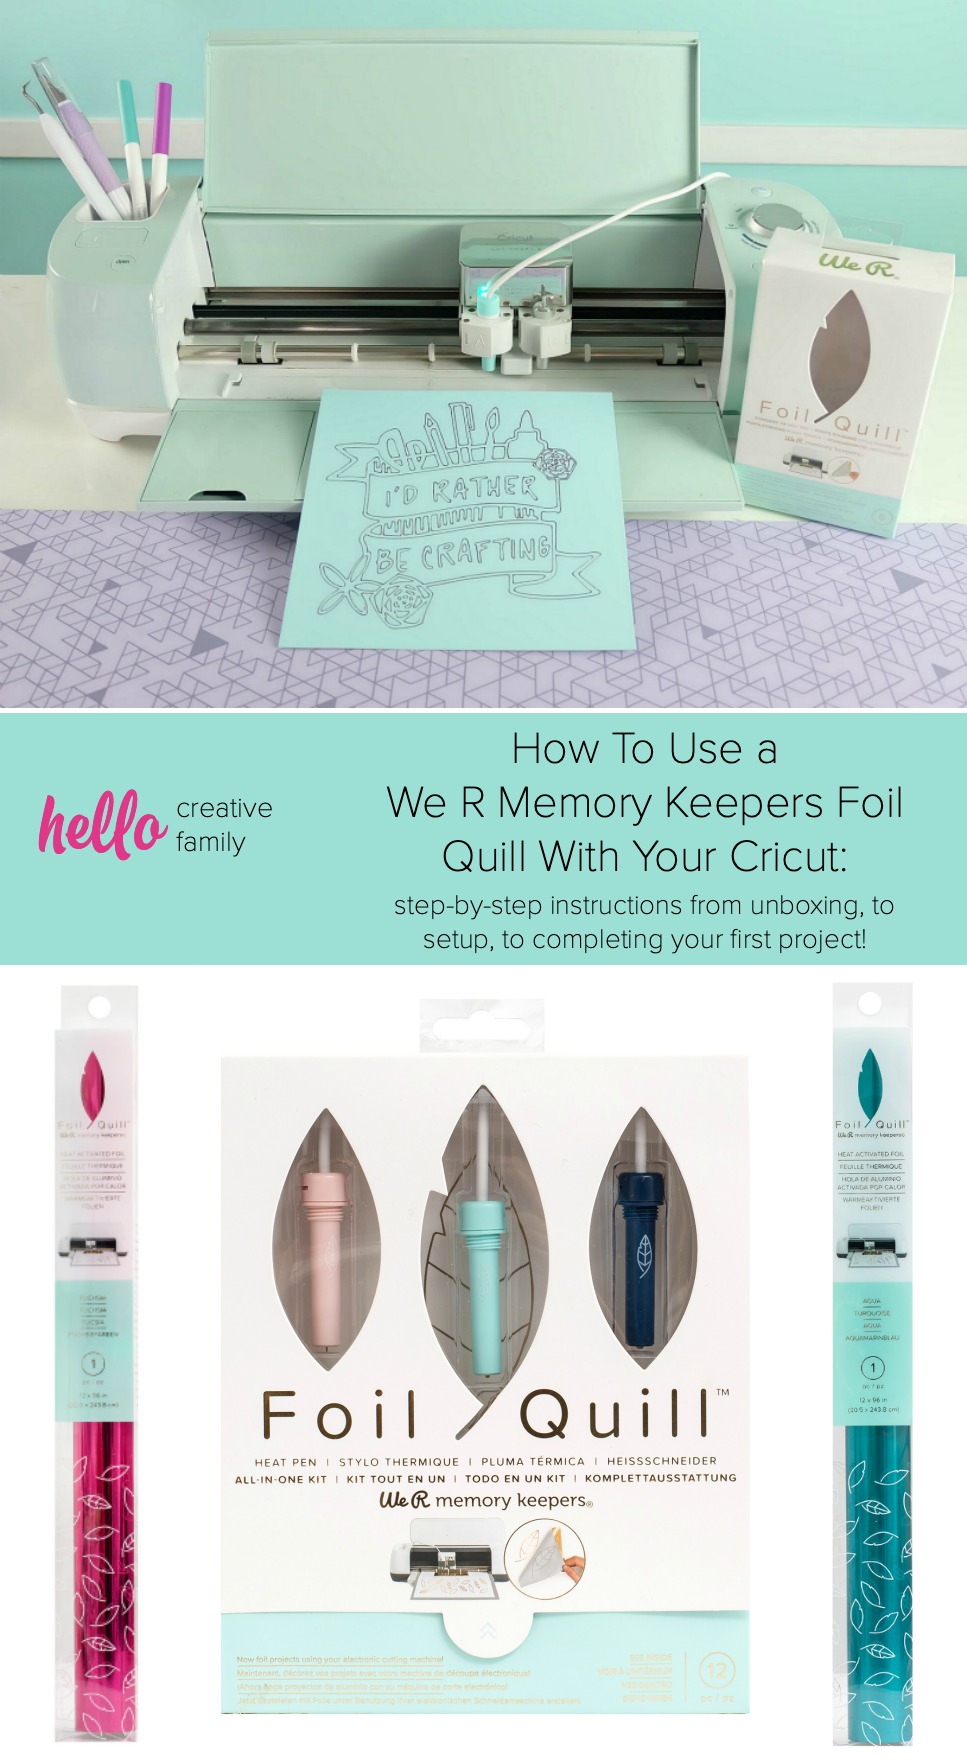 How To Use a We R Memory Keepers Foil Quill With Your Cricut: step-by-step photos and instructions from unboxing, to setup, to completing your first project! It's foiling made easy! Give your DIY paper crafts an embossed look with this amazing tool! #Cricut #CricutMade #FoilQuill #Mink #Foiling #Craft